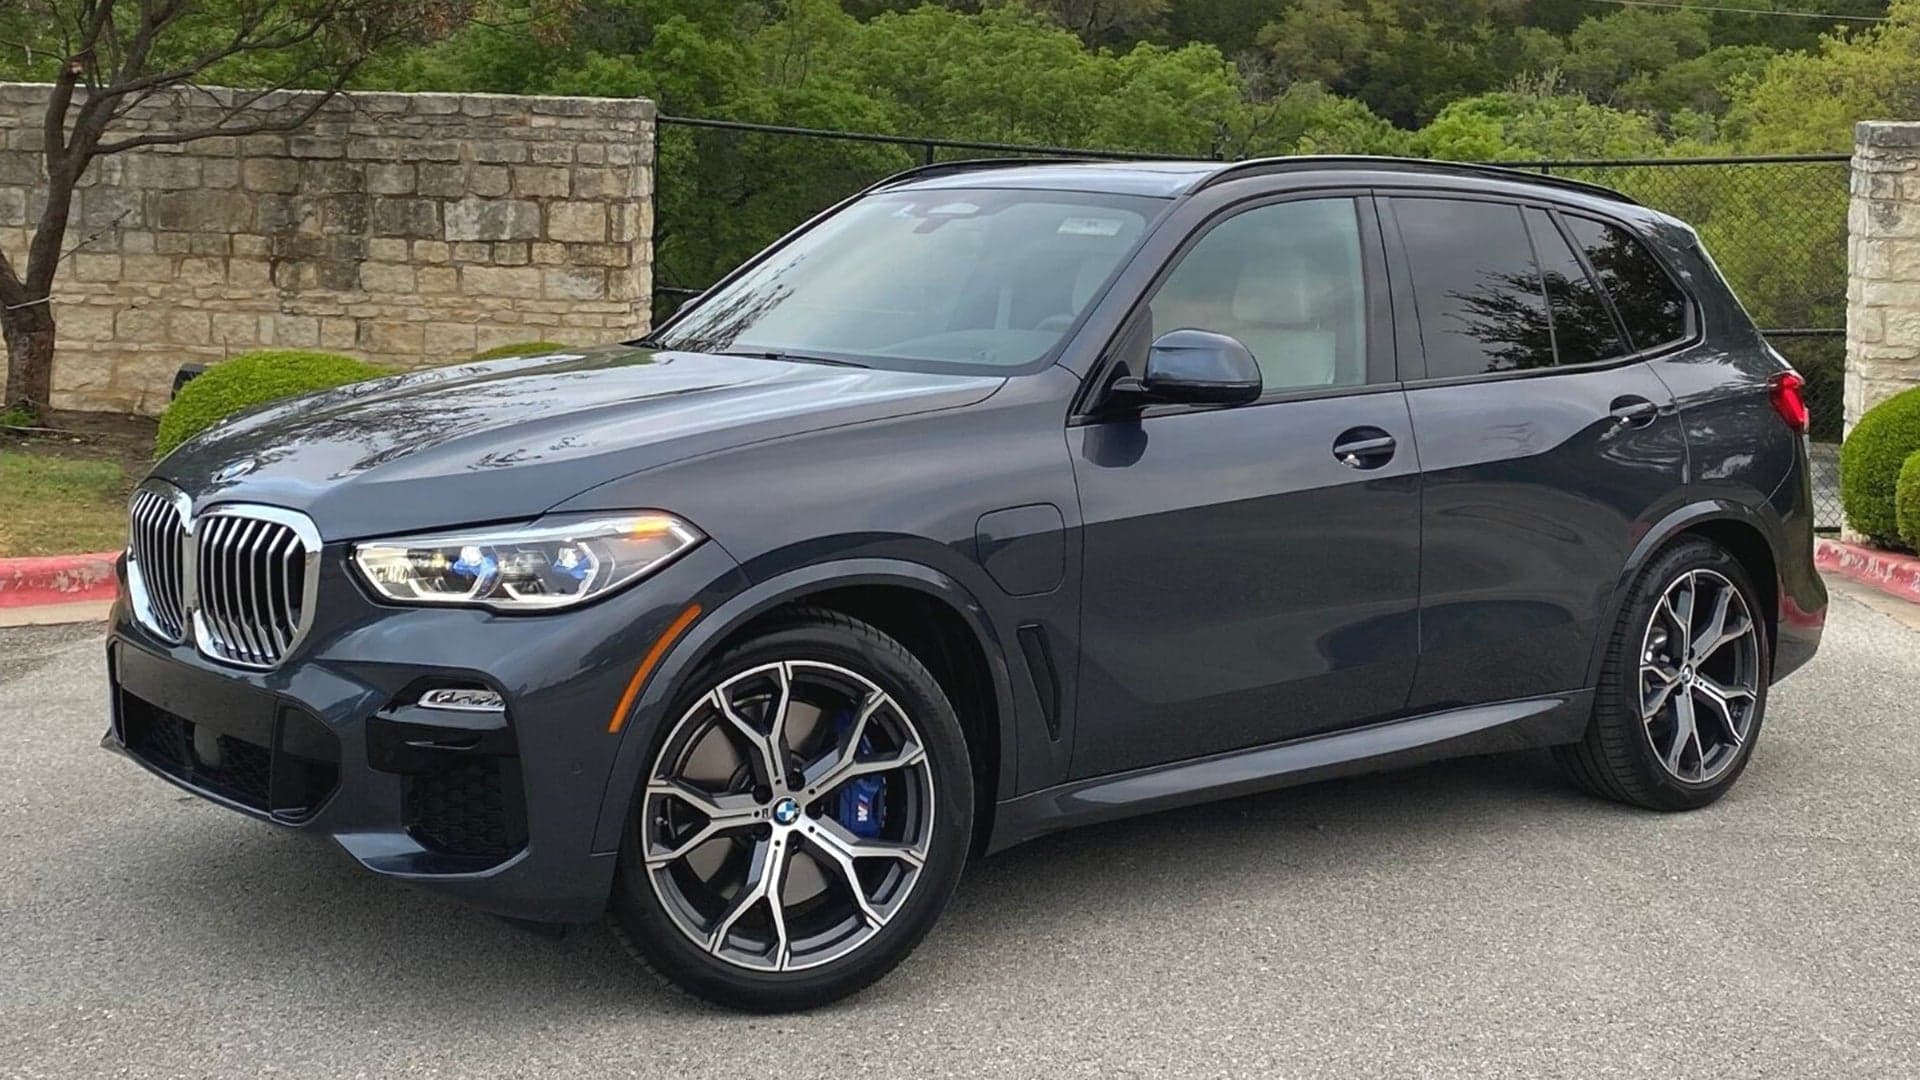 2021 BMW X5 xDrive 45e Review: A Beautifully Competent Plug-In Hybrid